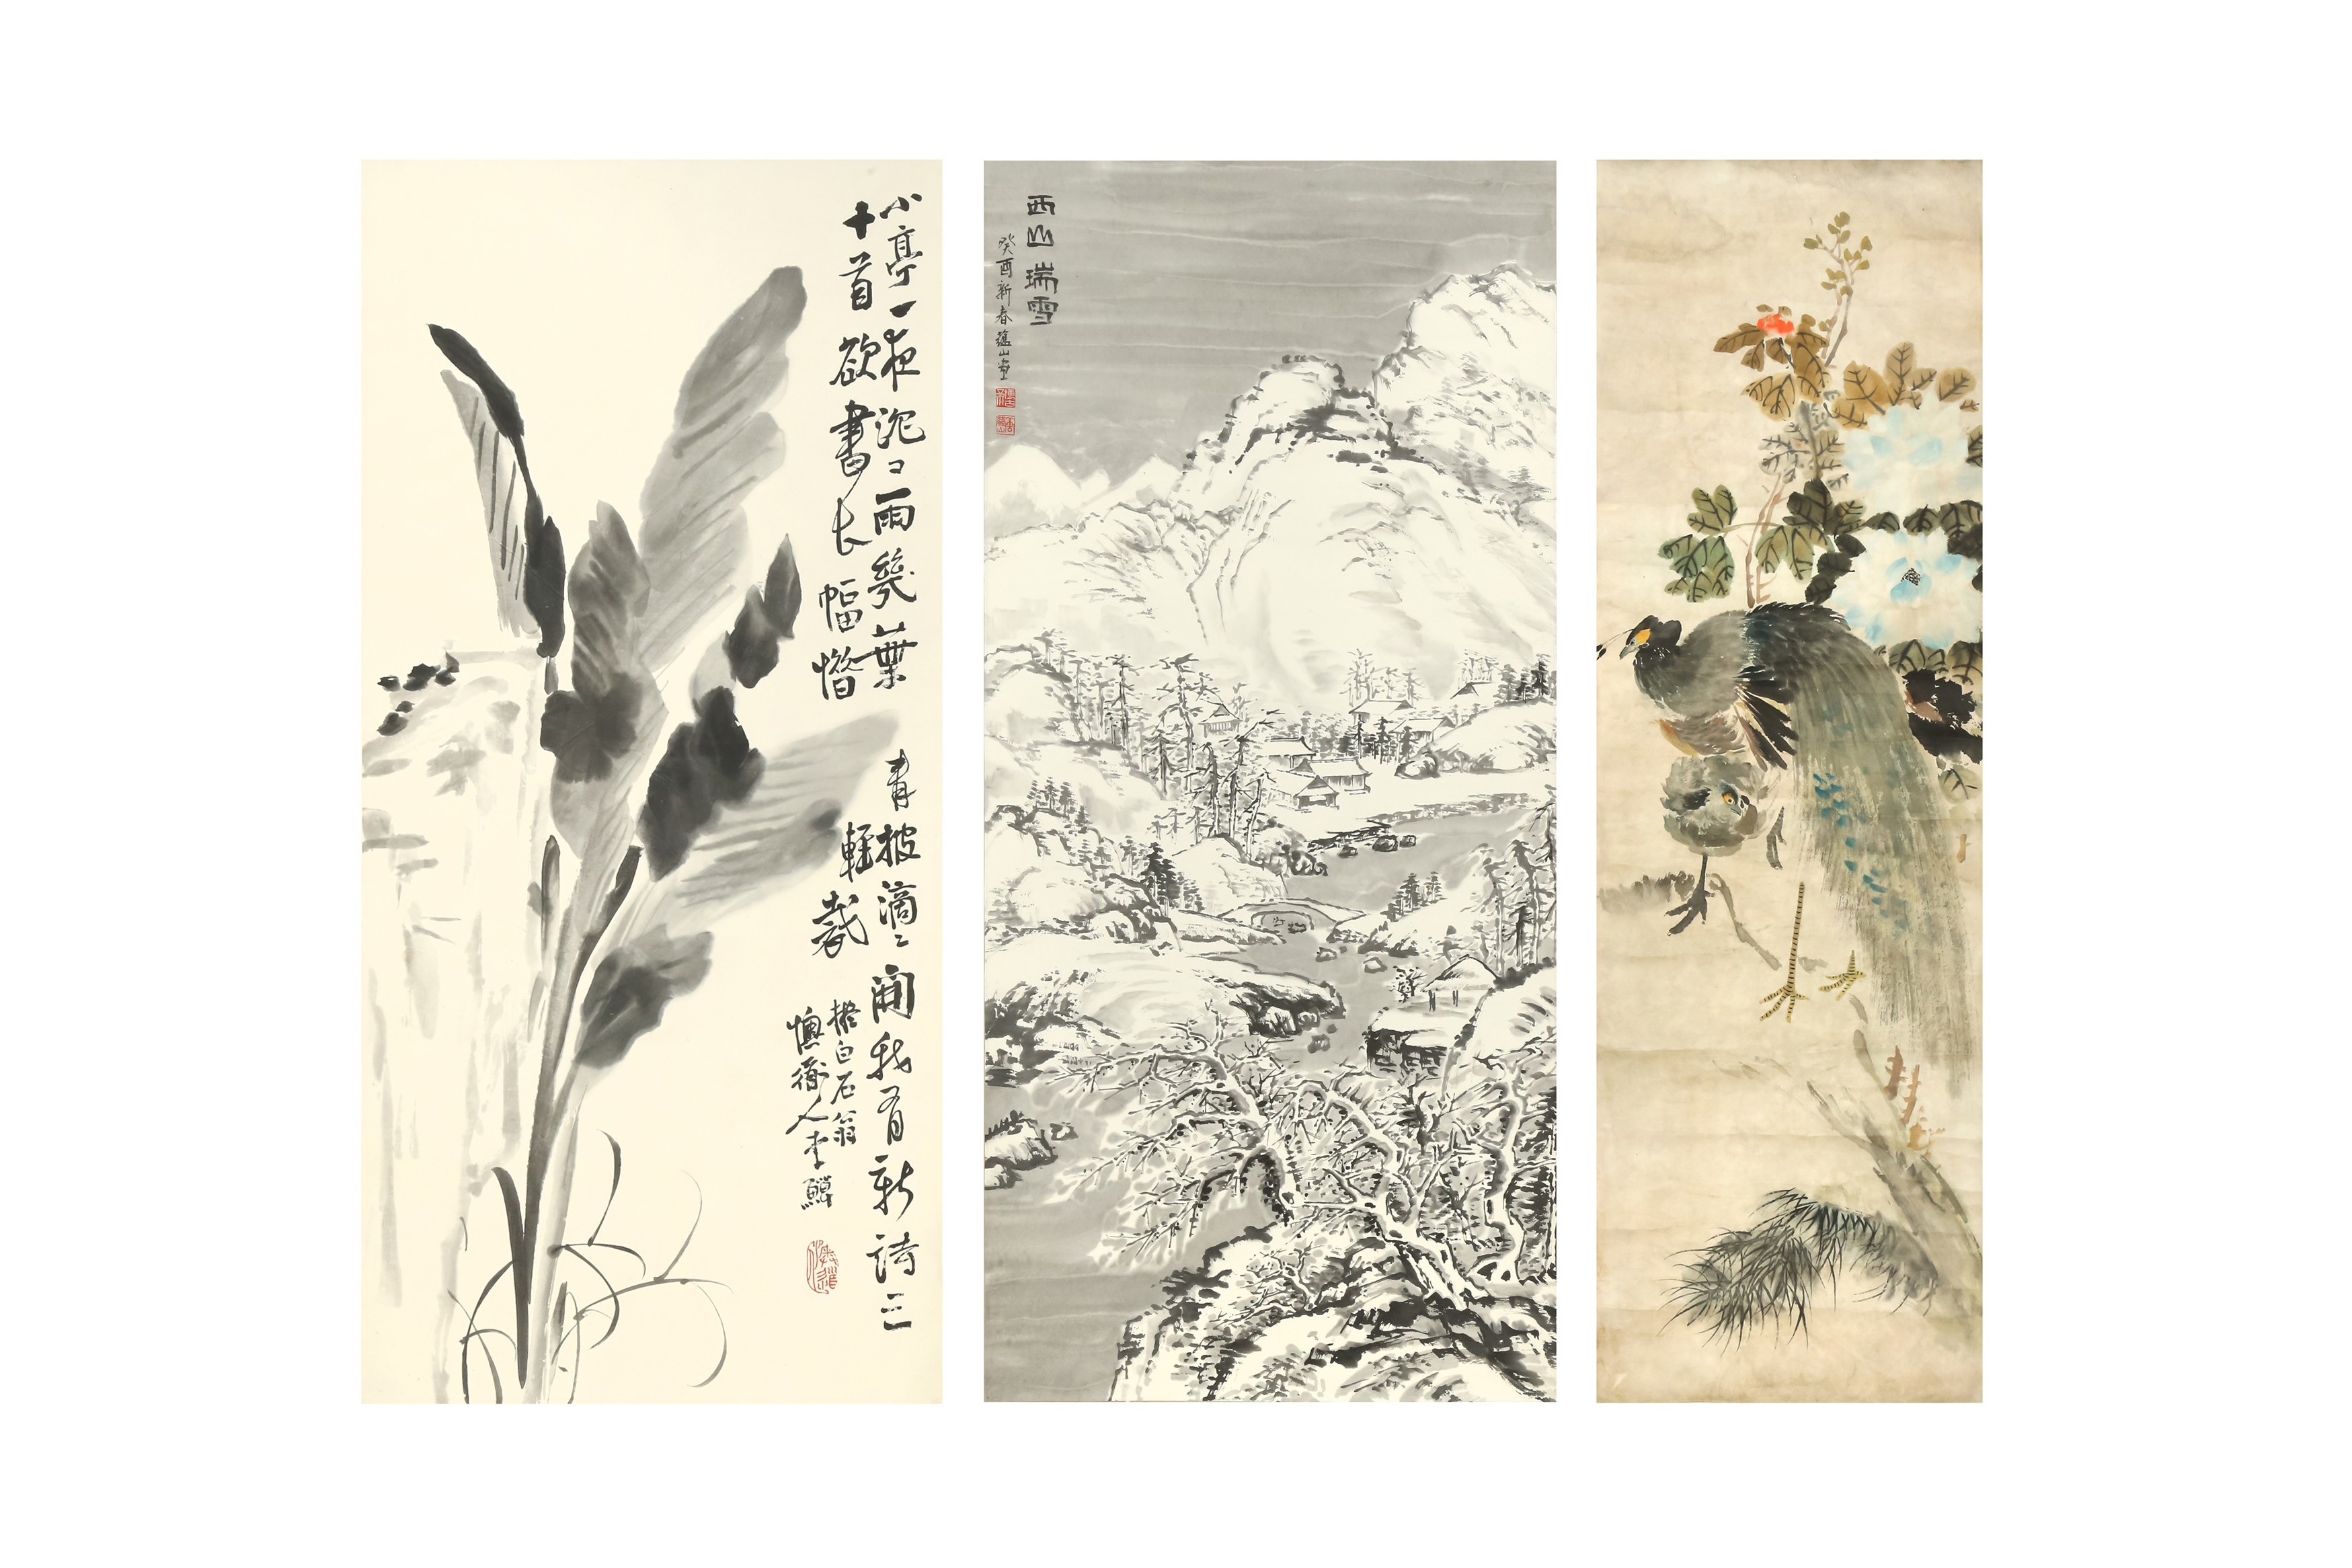 THREE CHINESE HANGING SCROLL PAINTINGS 二十世紀 掛軸三幅